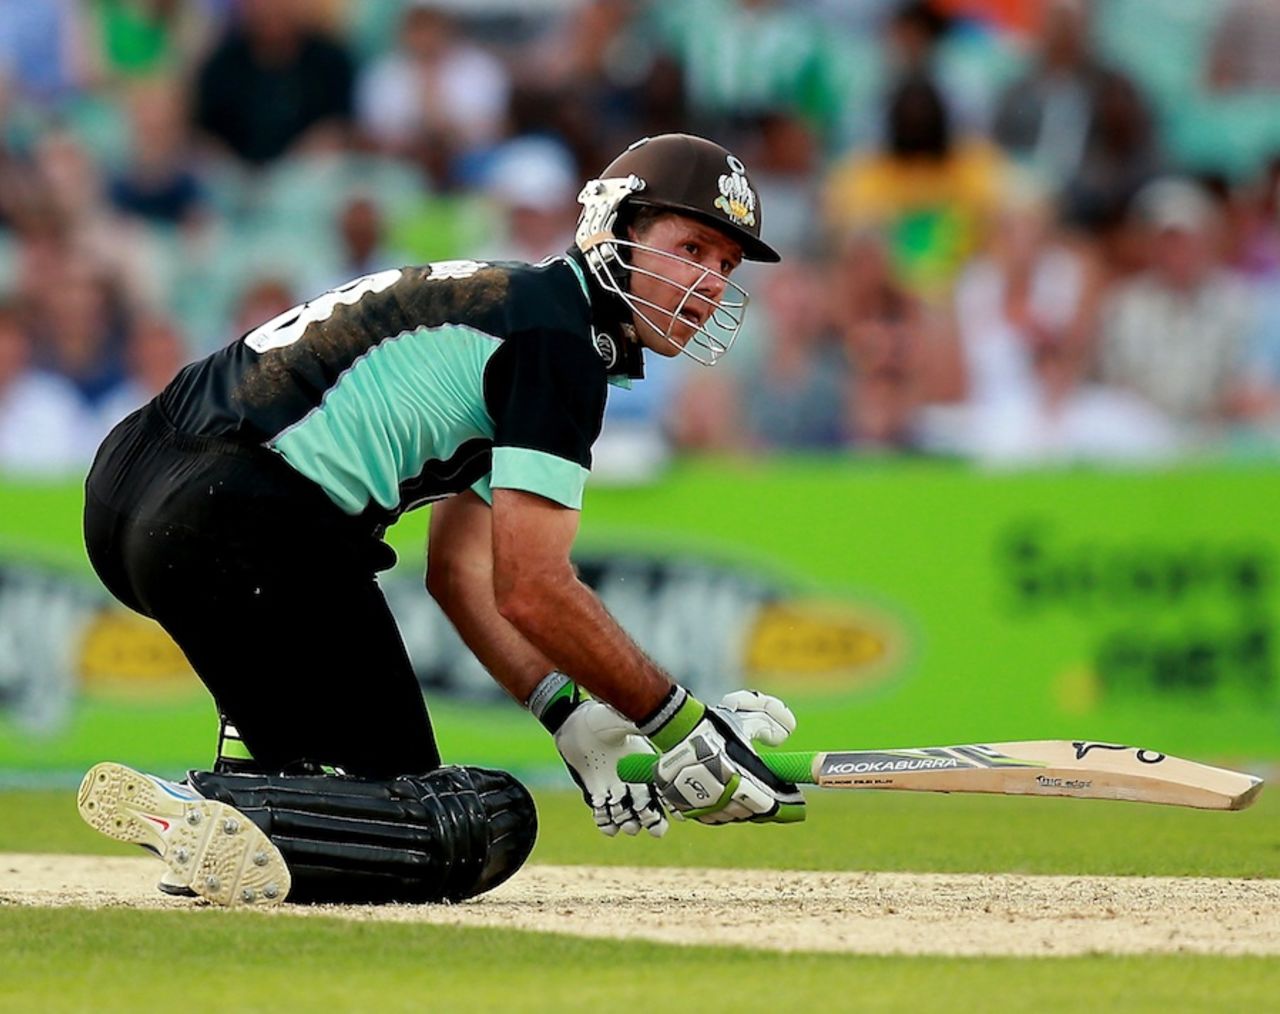 Ricky Ponting scored 65 off 54 balls, Surrey v Essex, Friends Life t20, The Oval, July 15, 2013